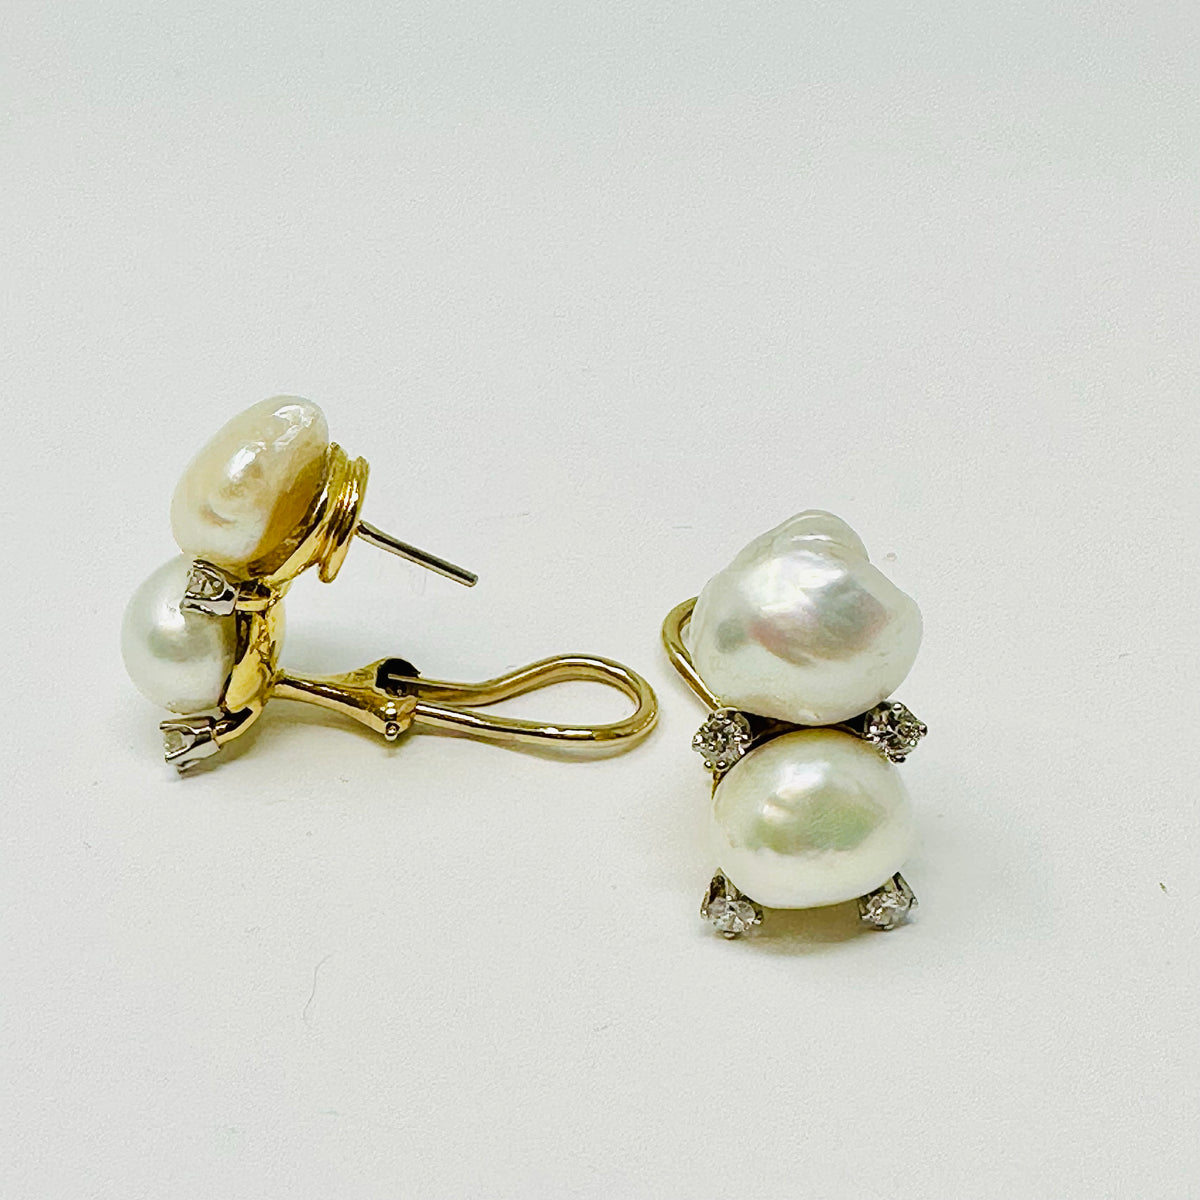 Load image into Gallery viewer, 18K Gold Earrings with 4 Biwa Cultured Pearls and 8 Full Diamonds
